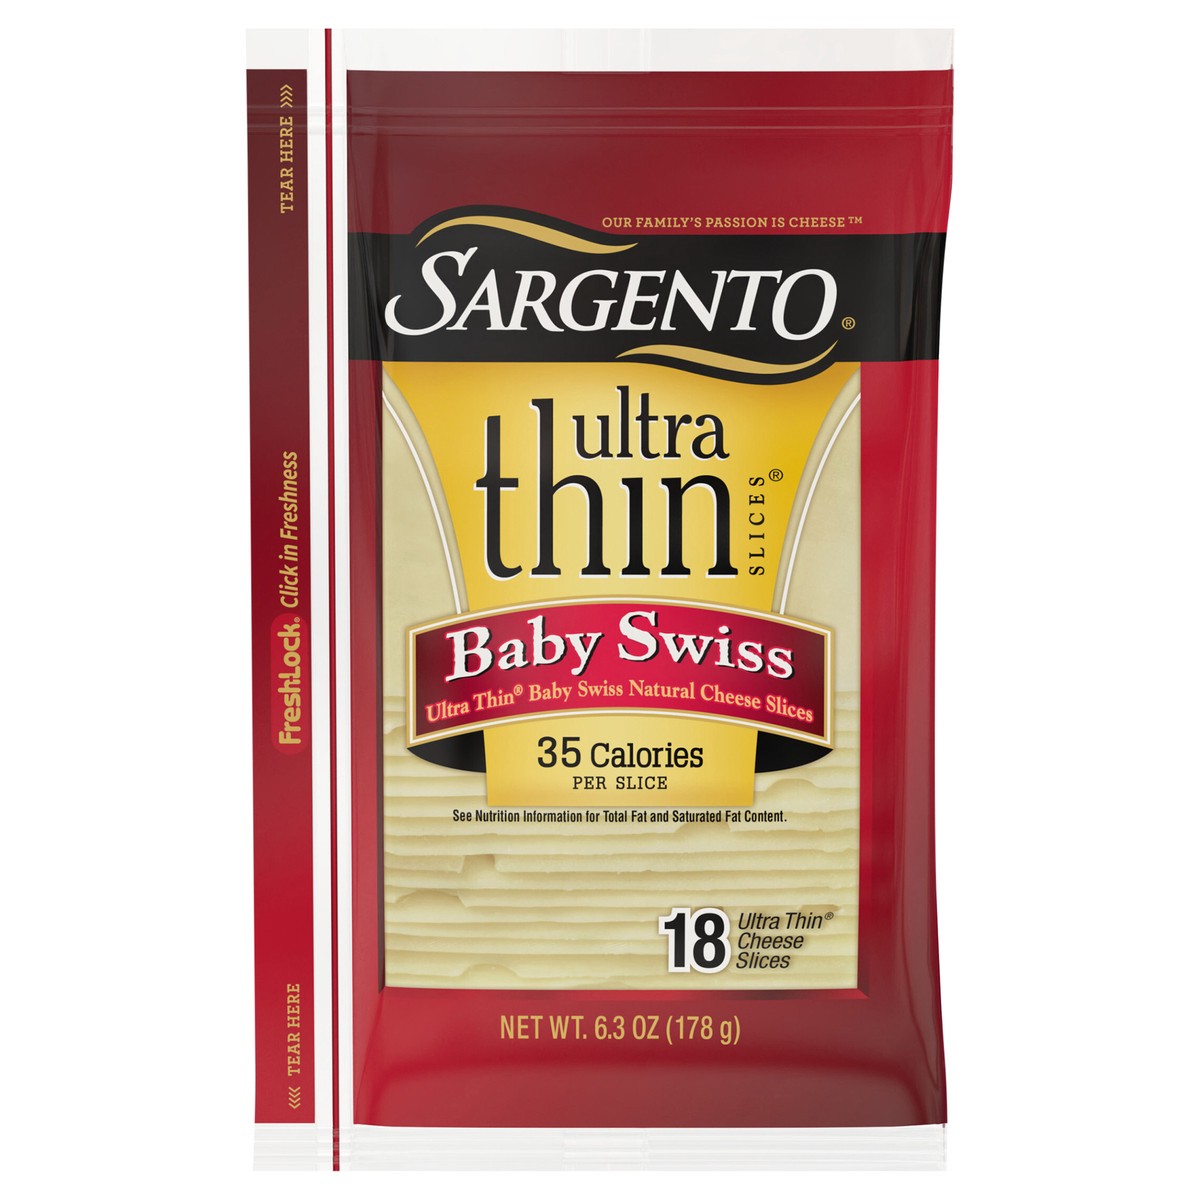 slide 1 of 1, Sargento Baby Swiss Natural Cheese Ultra Thin Slices, 6.3 oz., 18 slices, 6.3 oz